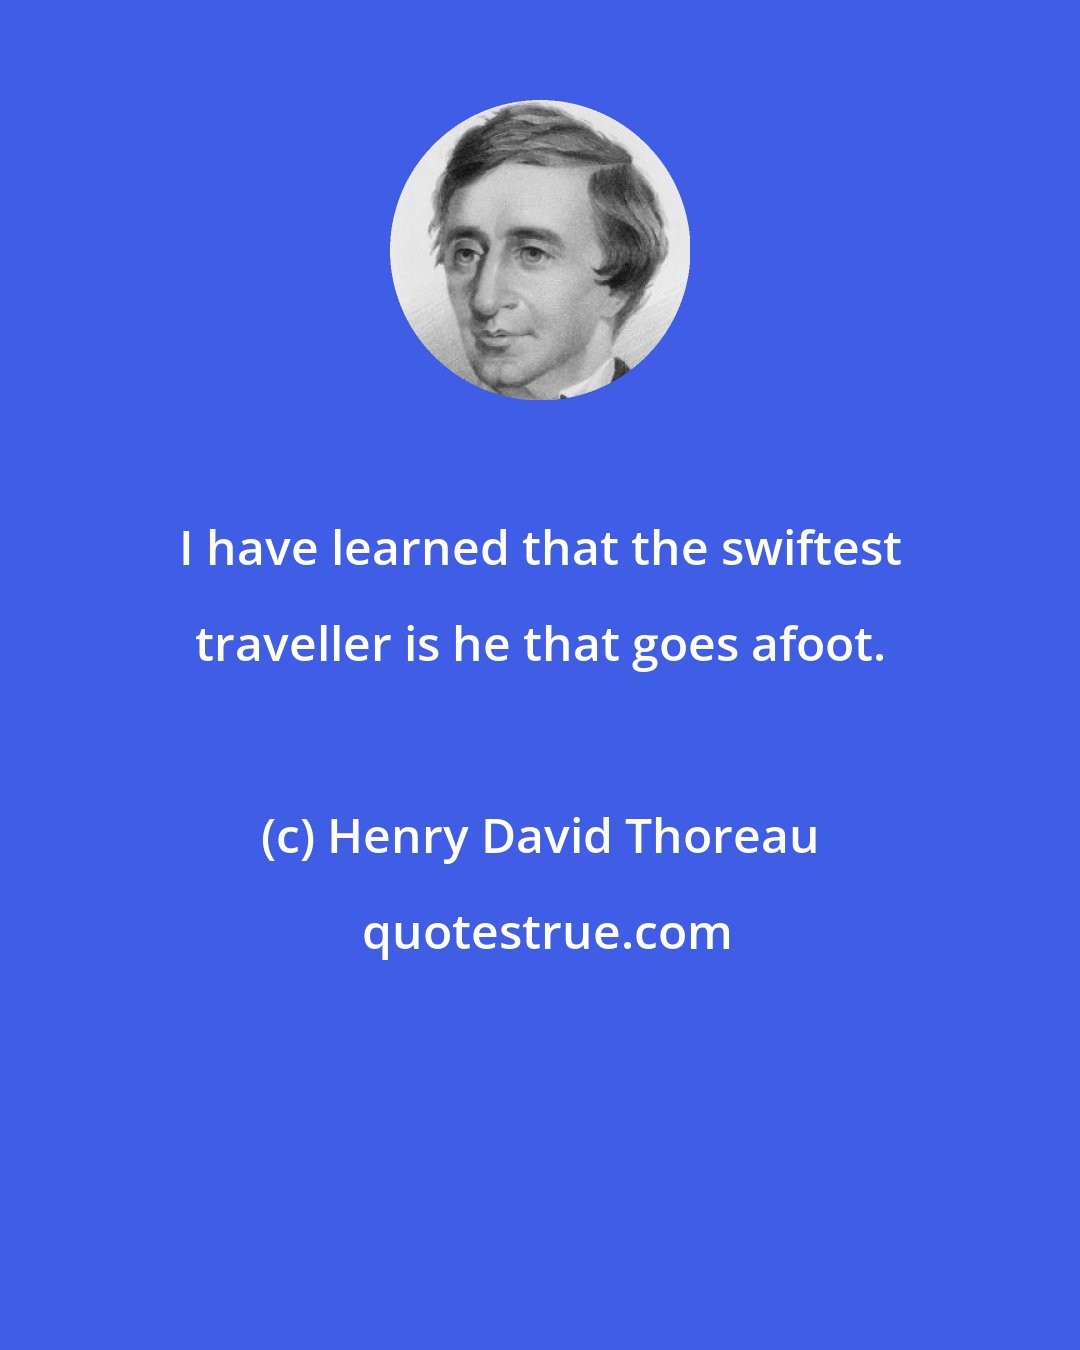 Henry David Thoreau: I have learned that the swiftest traveller is he that goes afoot.